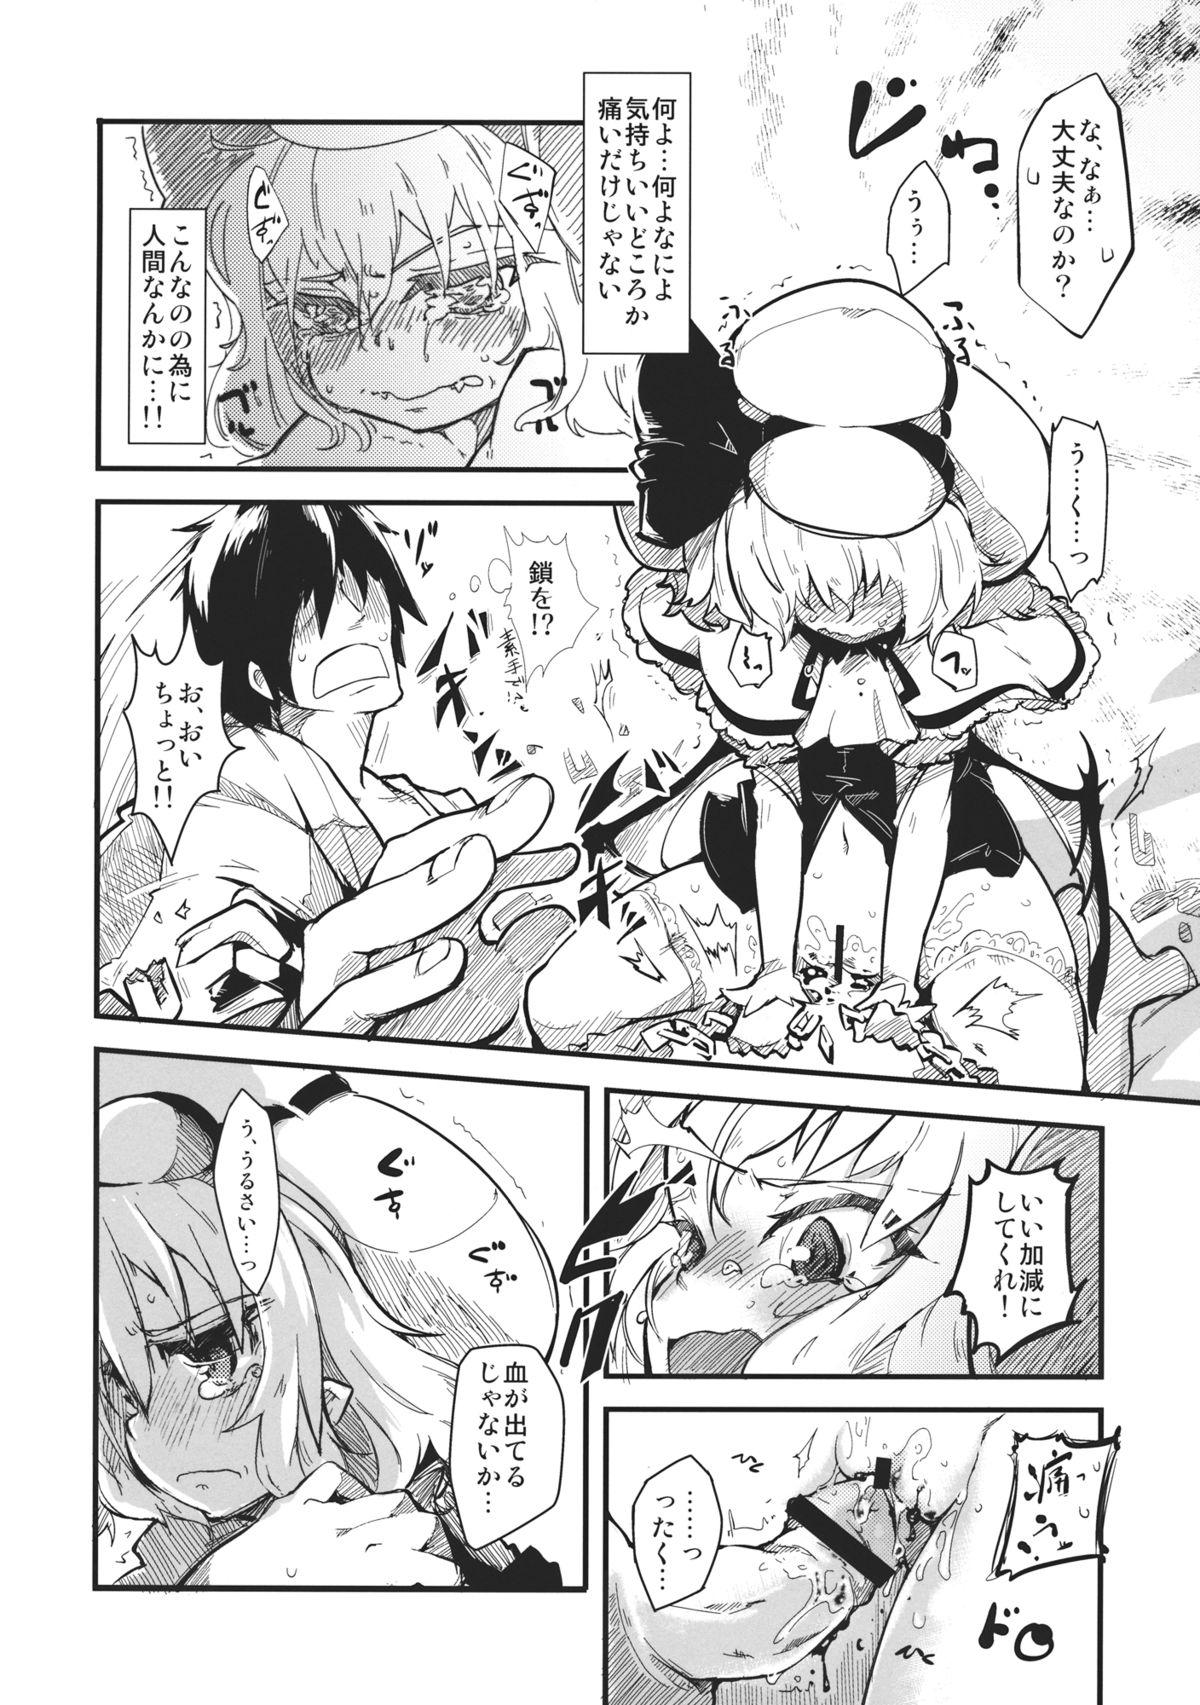 Caught LolitaEmpress - Touhou project Her - Page 10